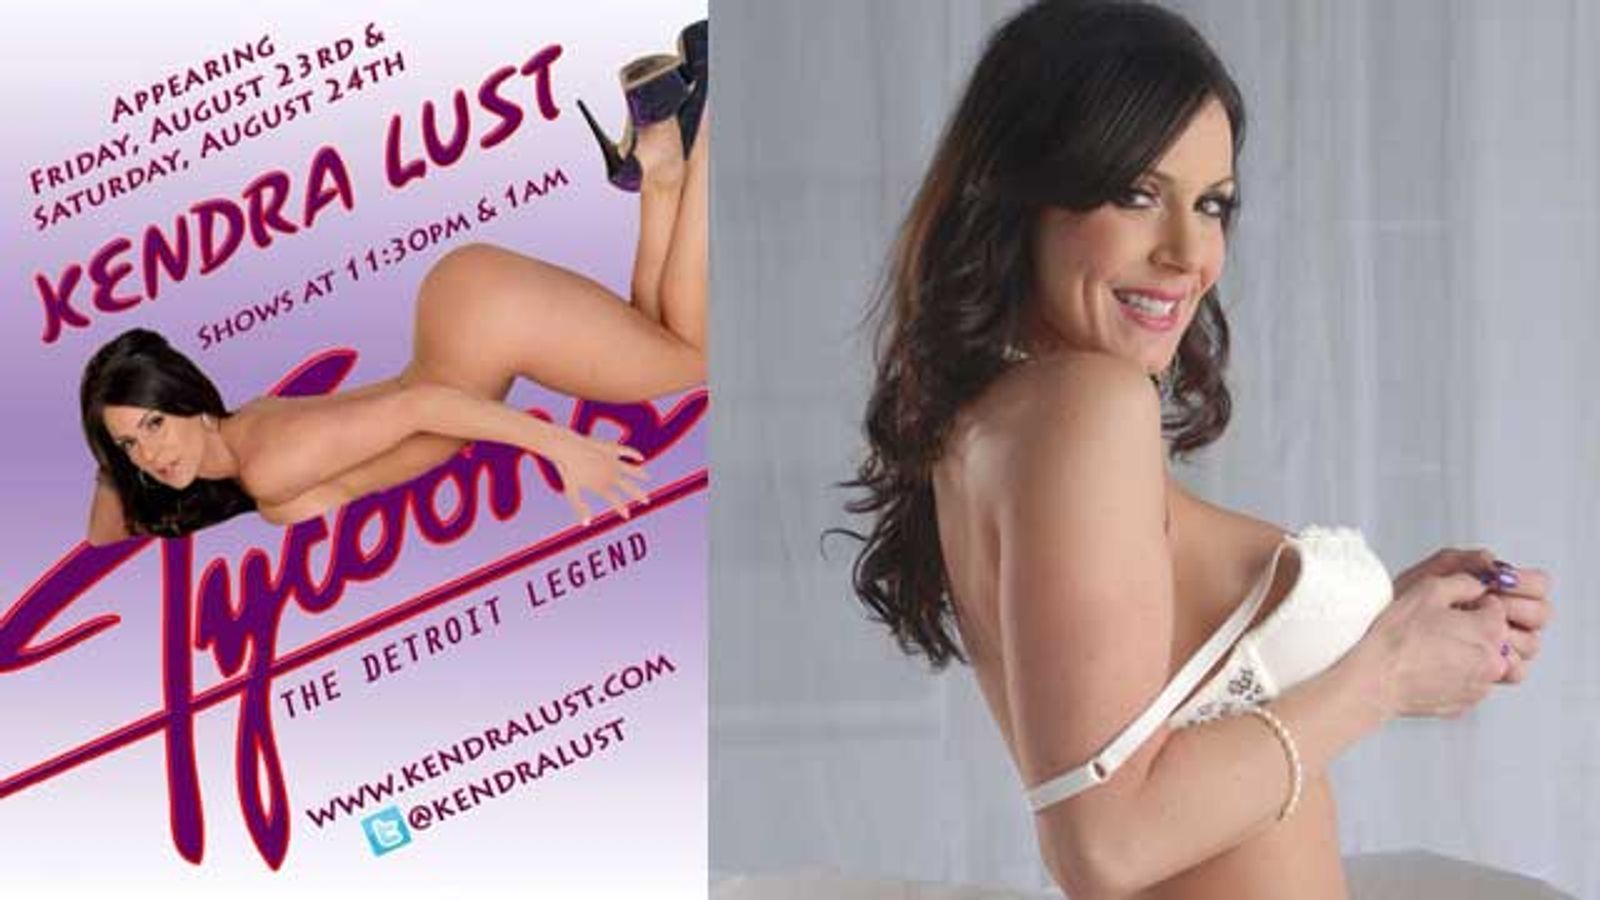 Kendra Lust Features at Tycoon’s Gentlemen’s Club in Detroit Aug. 23-4